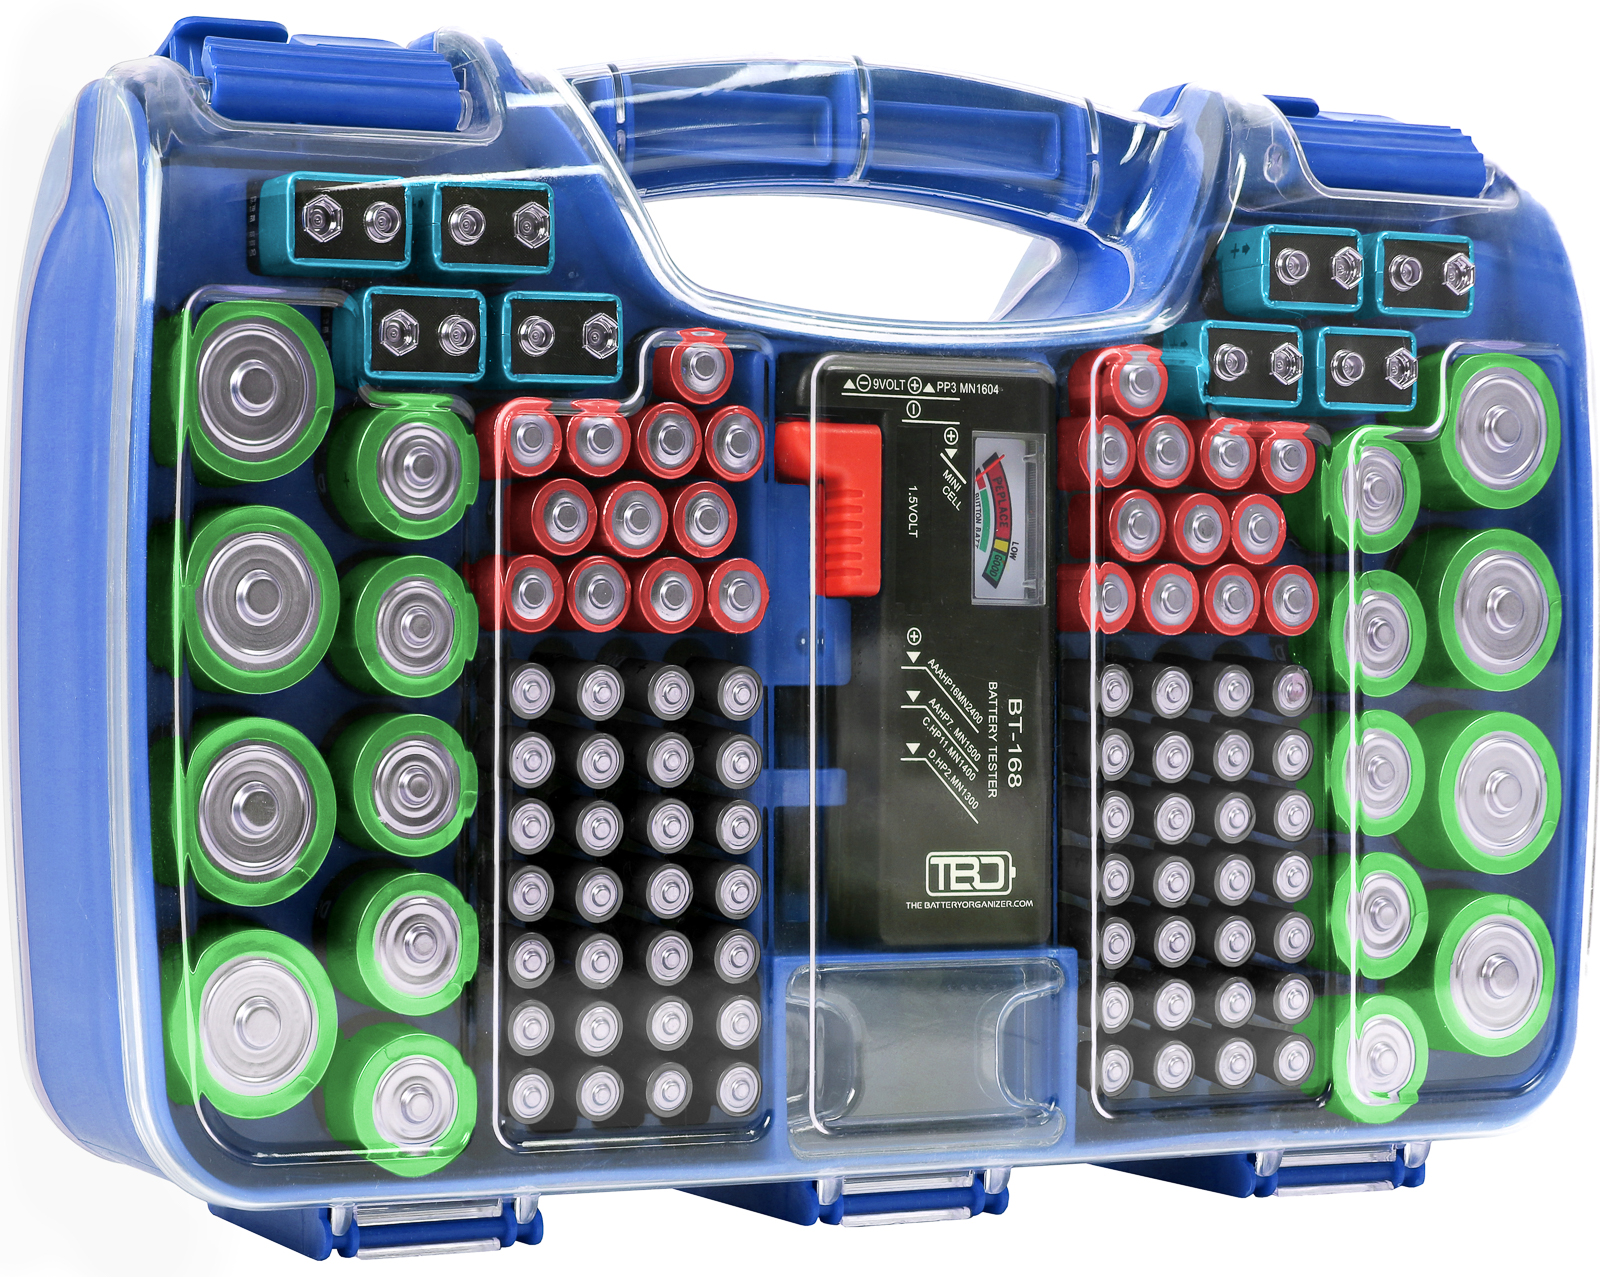 The Battery Organizer Battery Storage Case with Hinged Clear Cover, Includes a Removable Battery Tester, Holds 180 Batteries Various Sizes Blue. - image 1 of 7